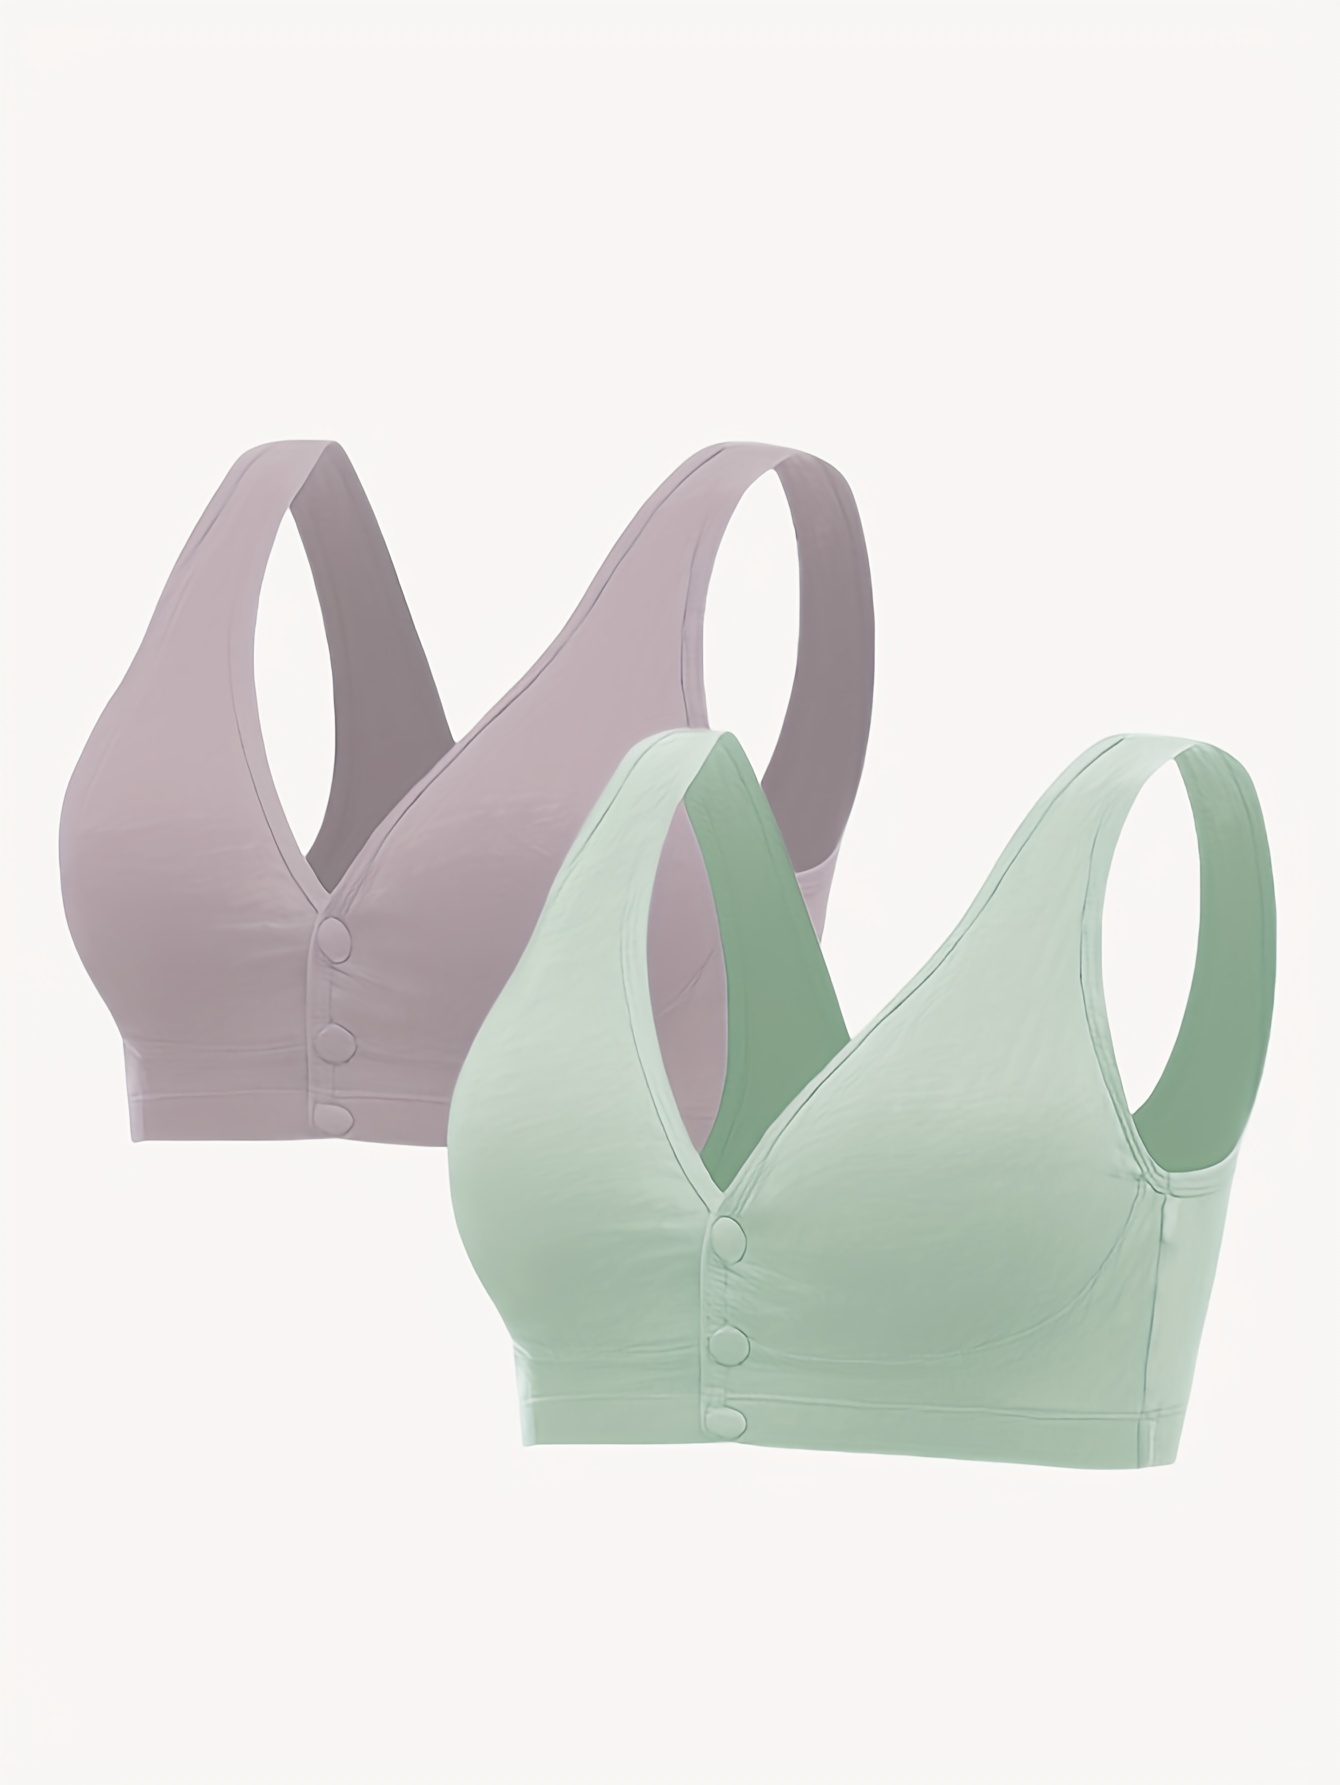 Pumping Bras  Sustainably soft, thoughtfully designed hands-free